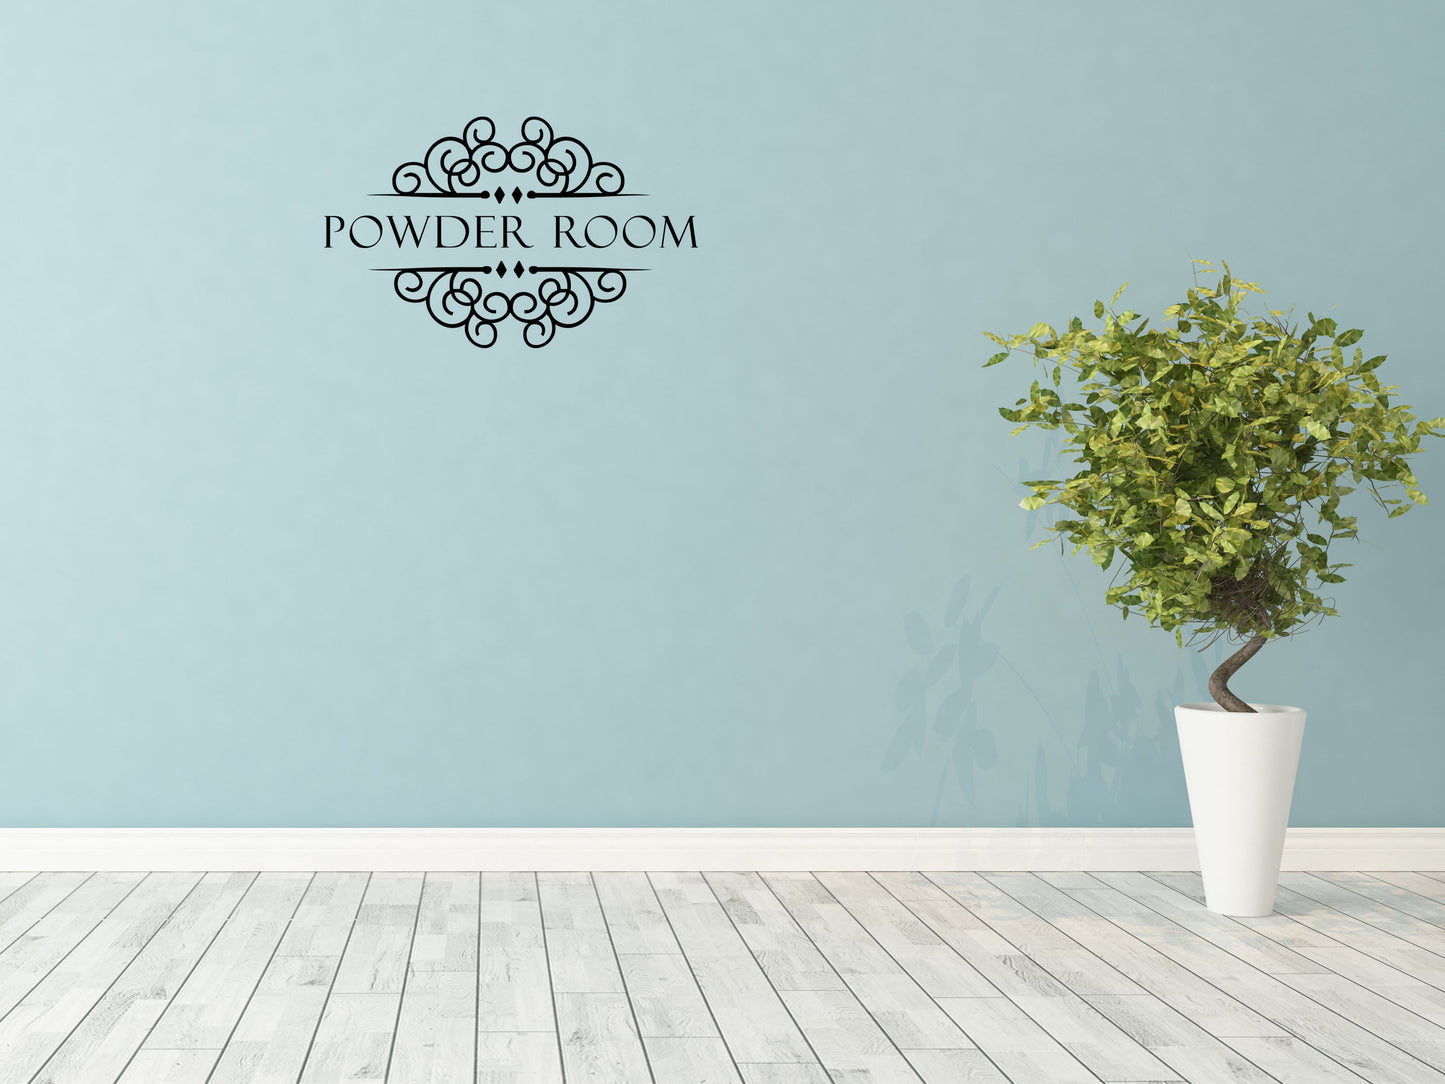 Powder Room Decal Wall Sign For Bathroom - Restroom Wall Art Vinyl Wall Decal Title Done 